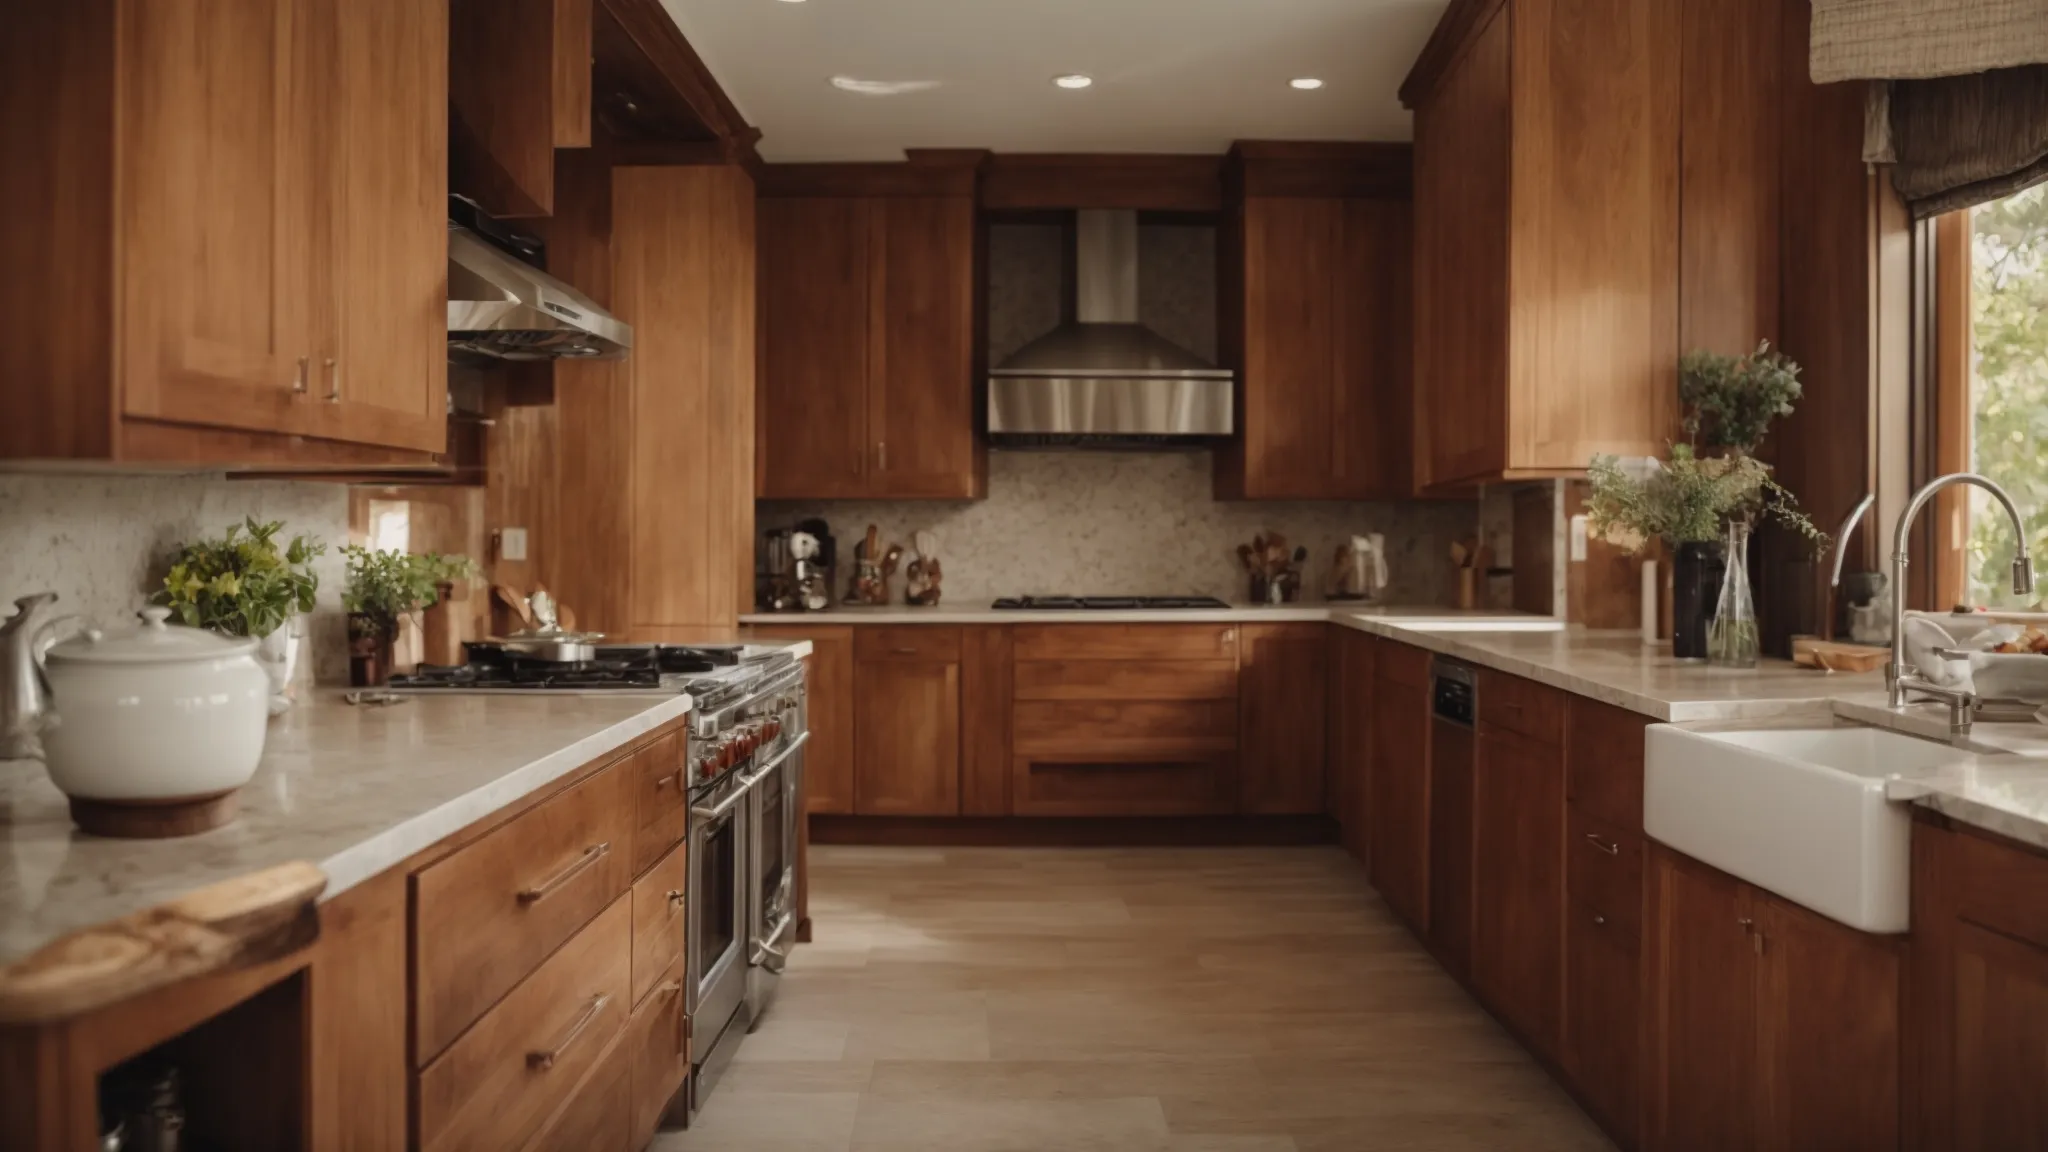 a kitchen with dated cabinets and countertops highlighted in the foreground, poised for renovation.